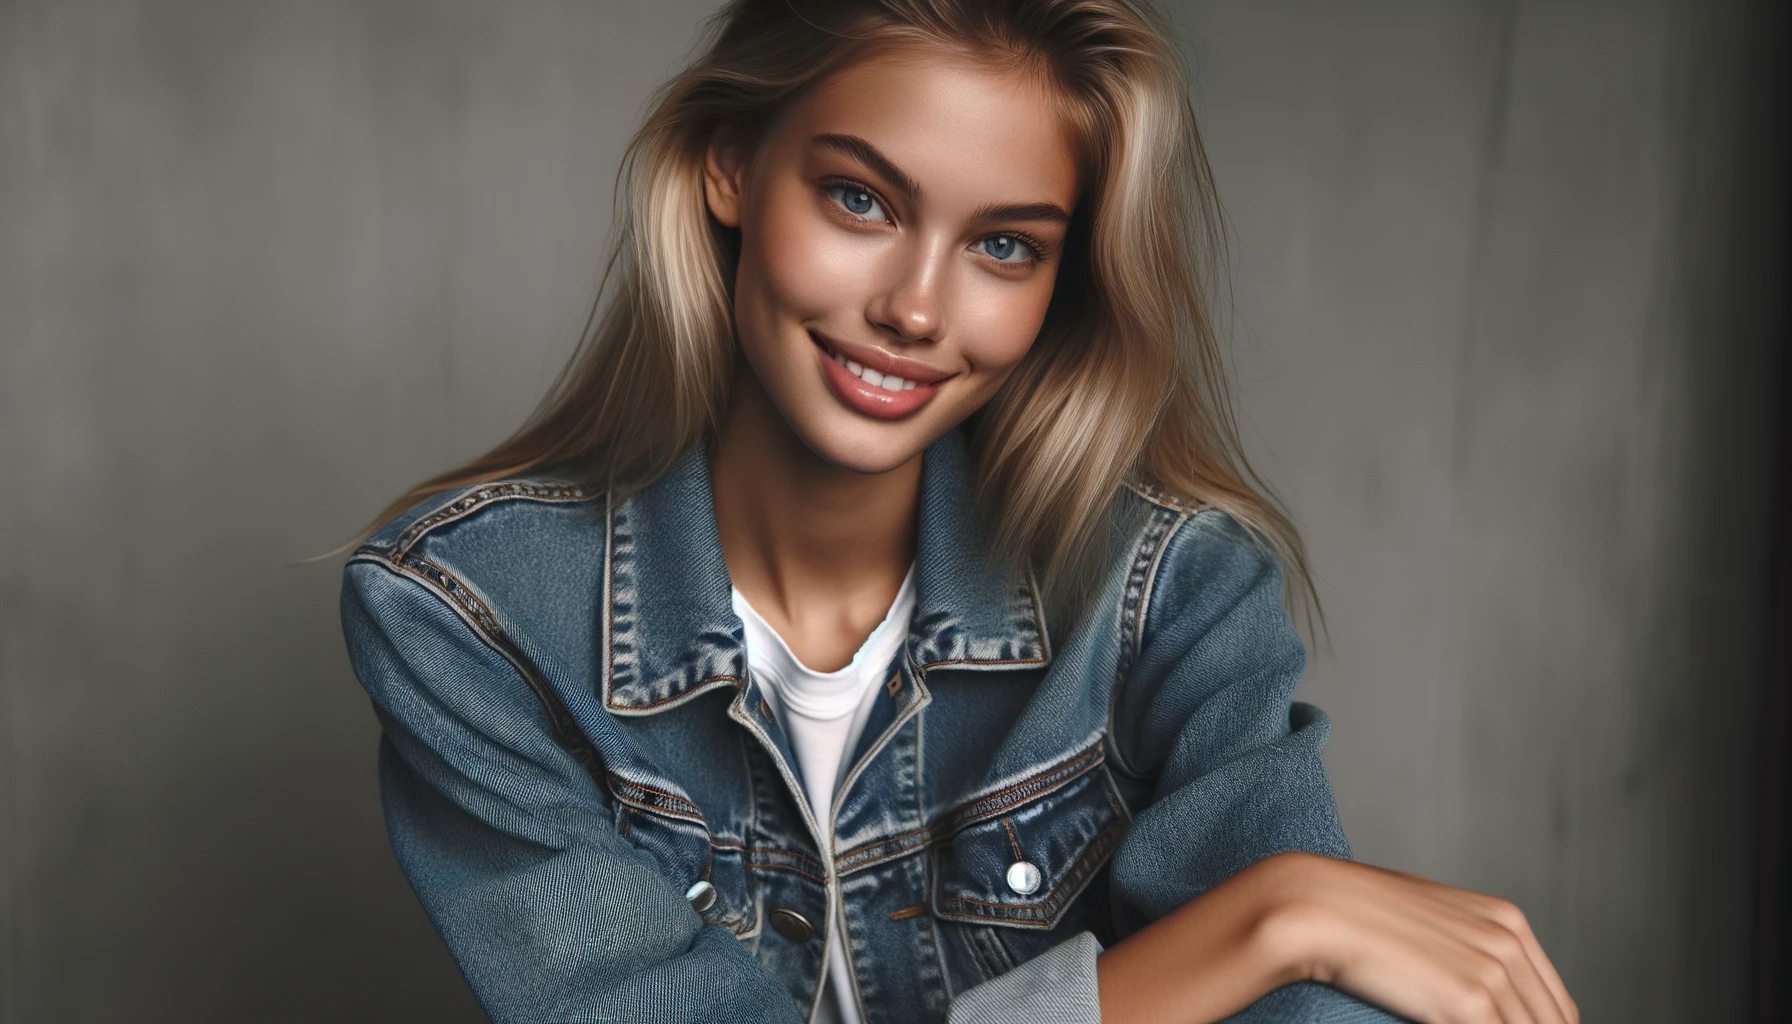 Portrait of a beautiful blonde model wearing a denim jacket over a white t-shir